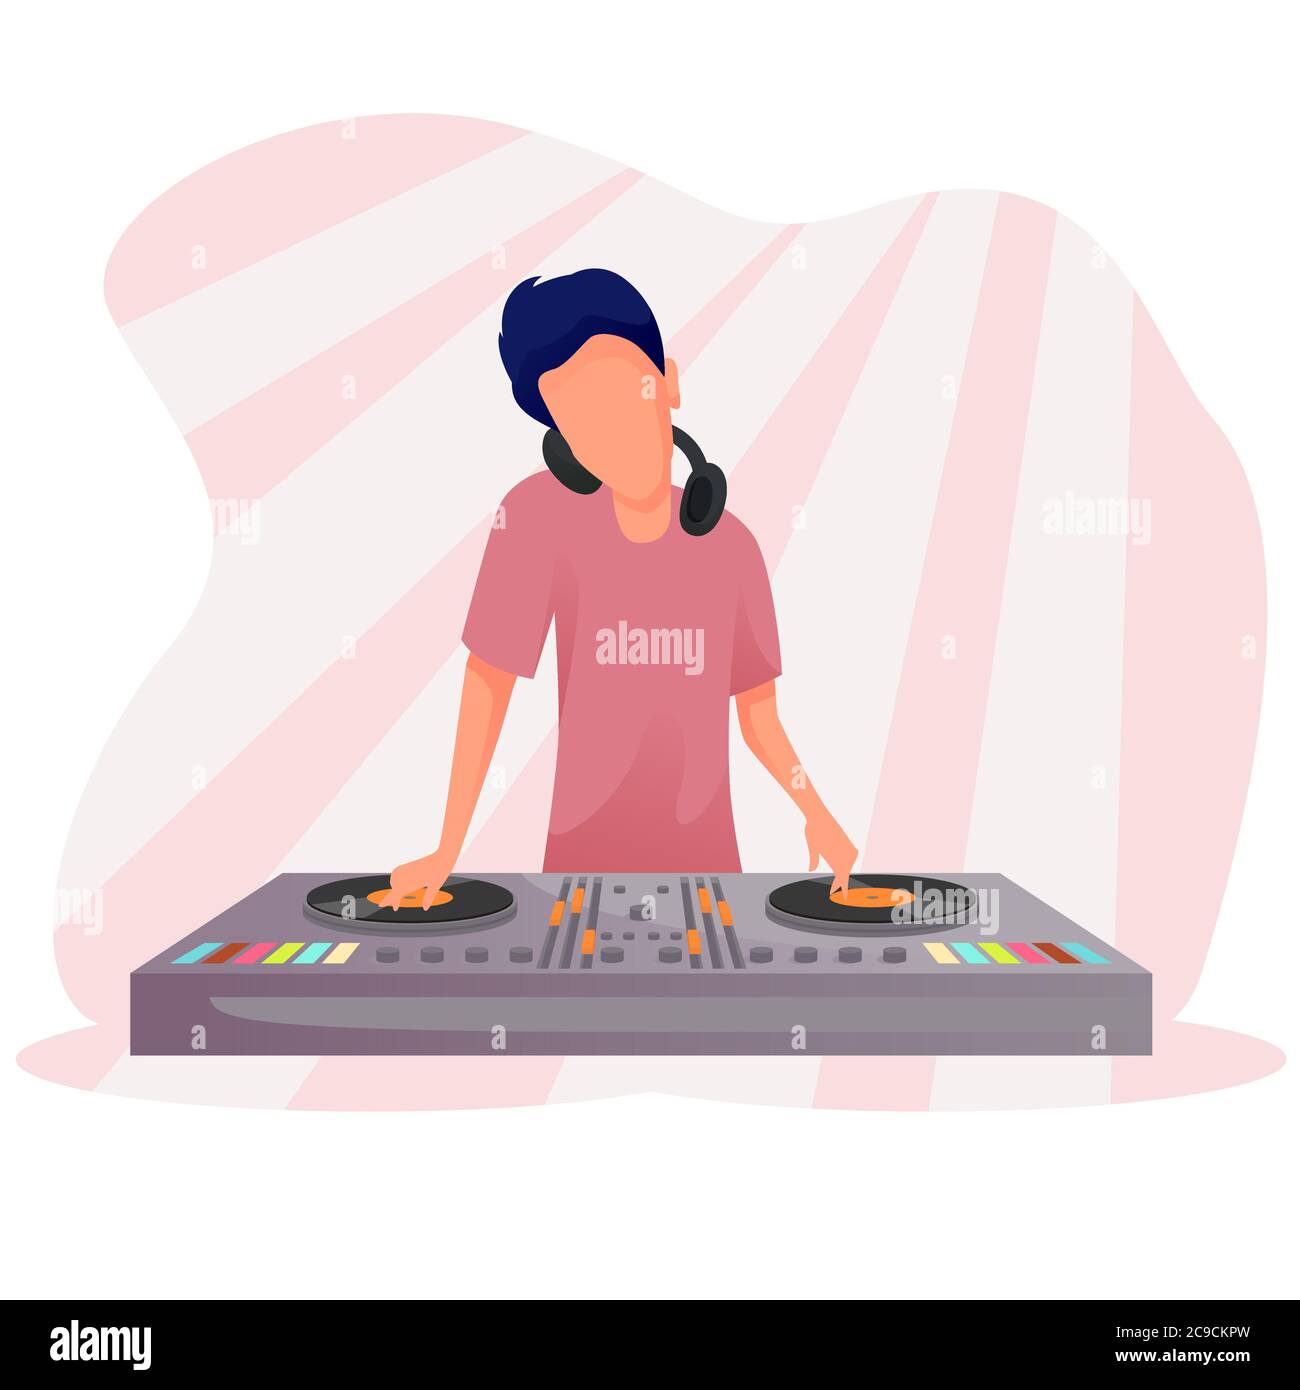 Vector illustration of a man DJing at the club, spinning records, colorful Stock Vector